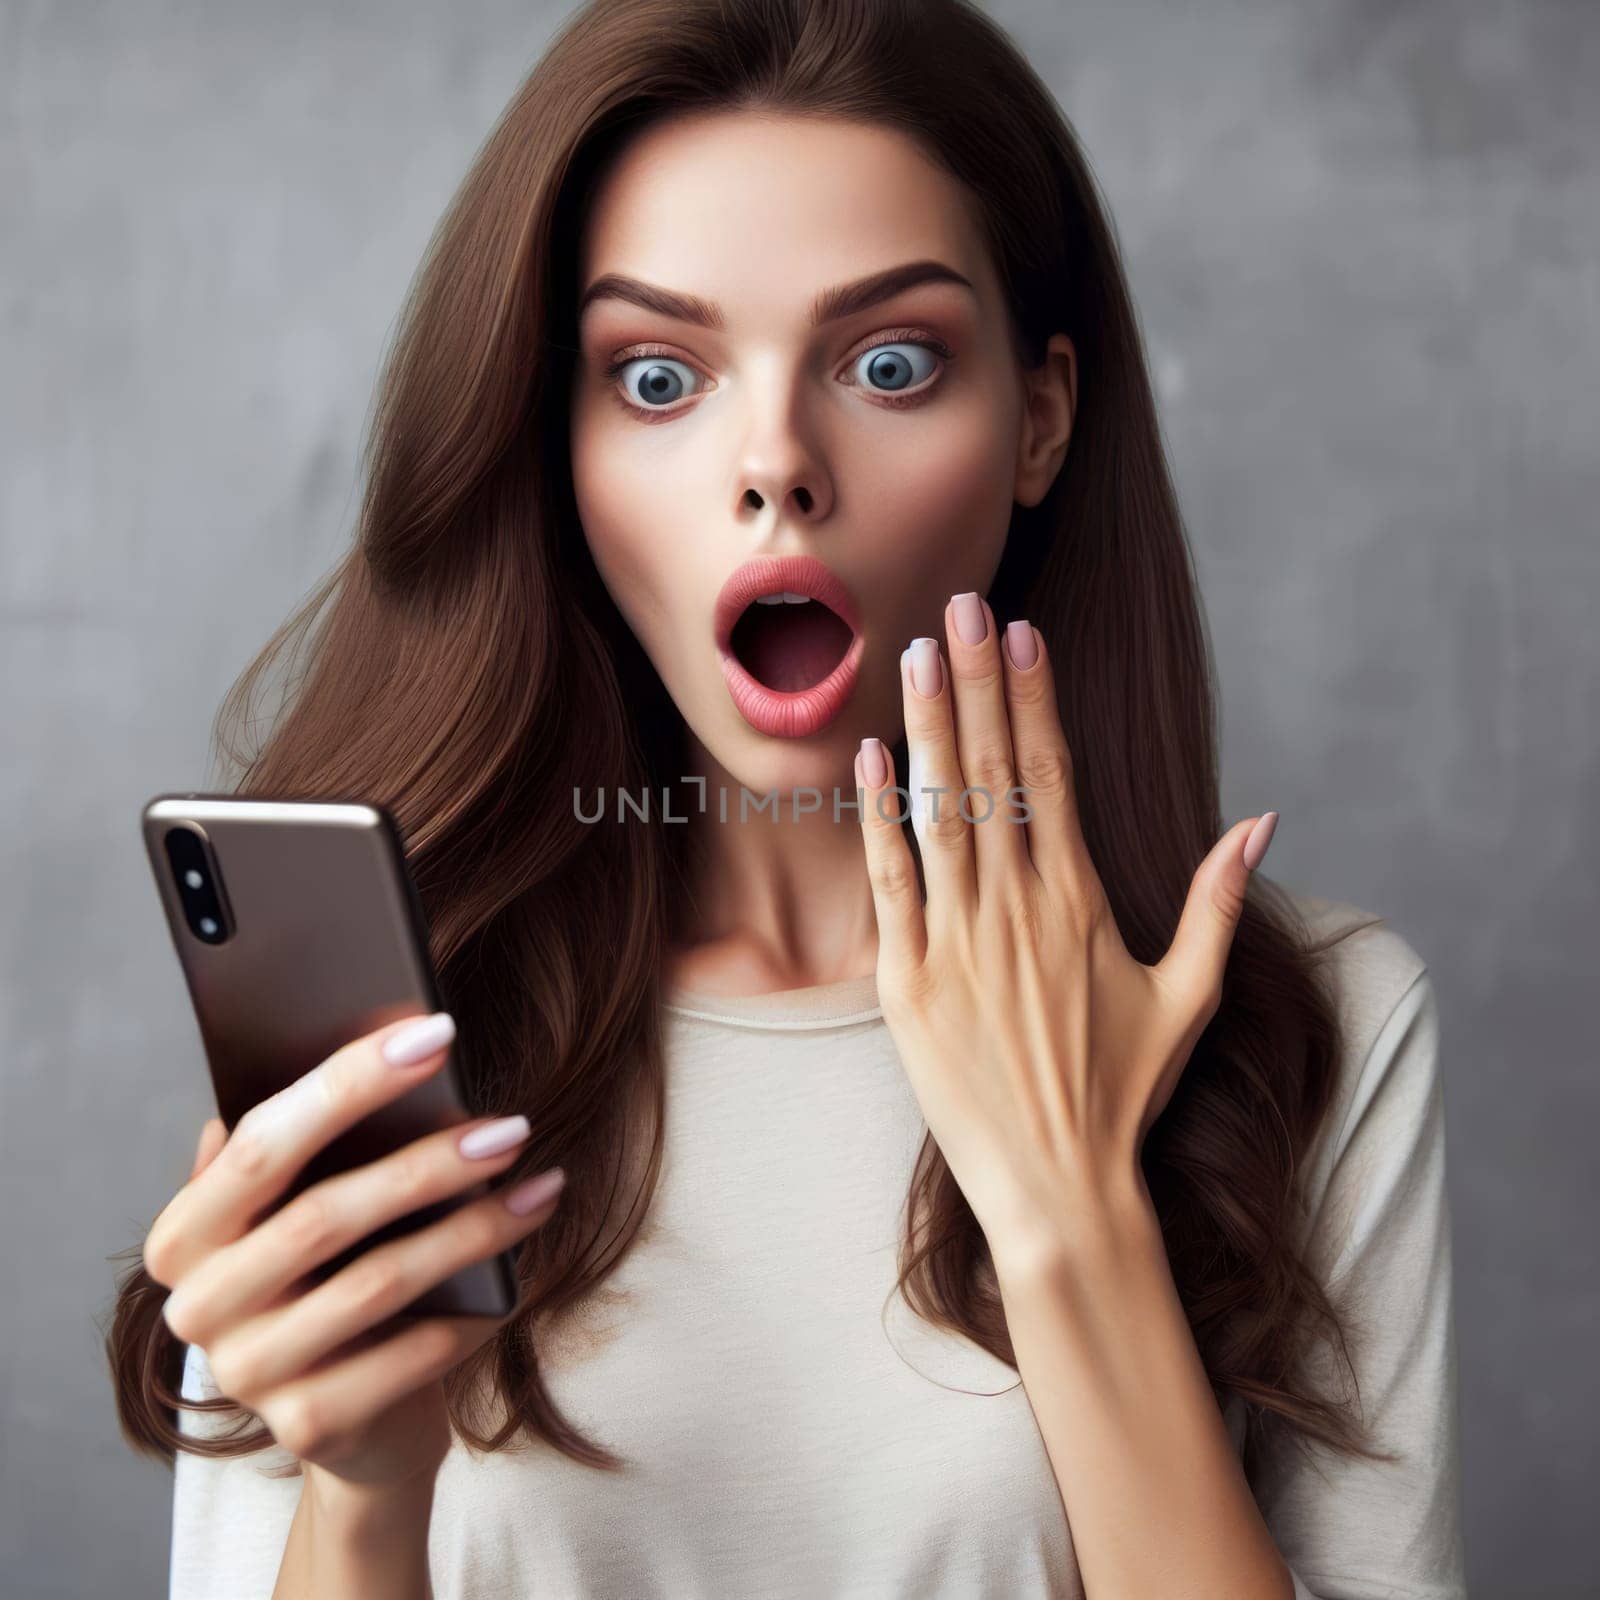 A pretty woman holding a smartphone, expressing surprise or awe against a grey backdrop